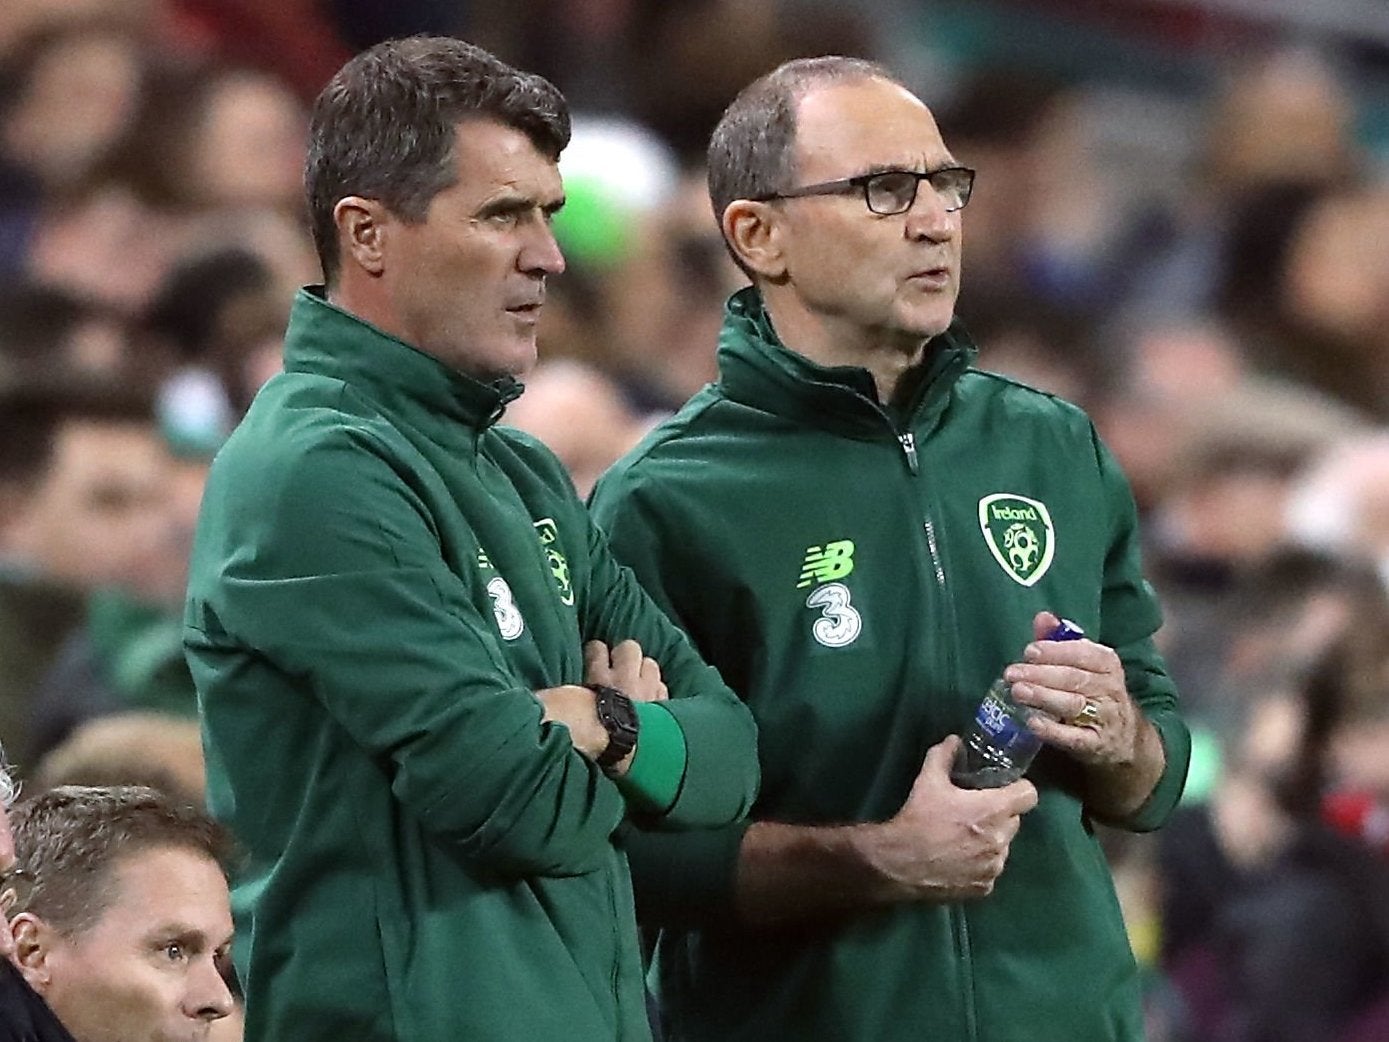 Roy Keane and Martin O'Neill have left their roles with the Republic of Ireland with immediate effect